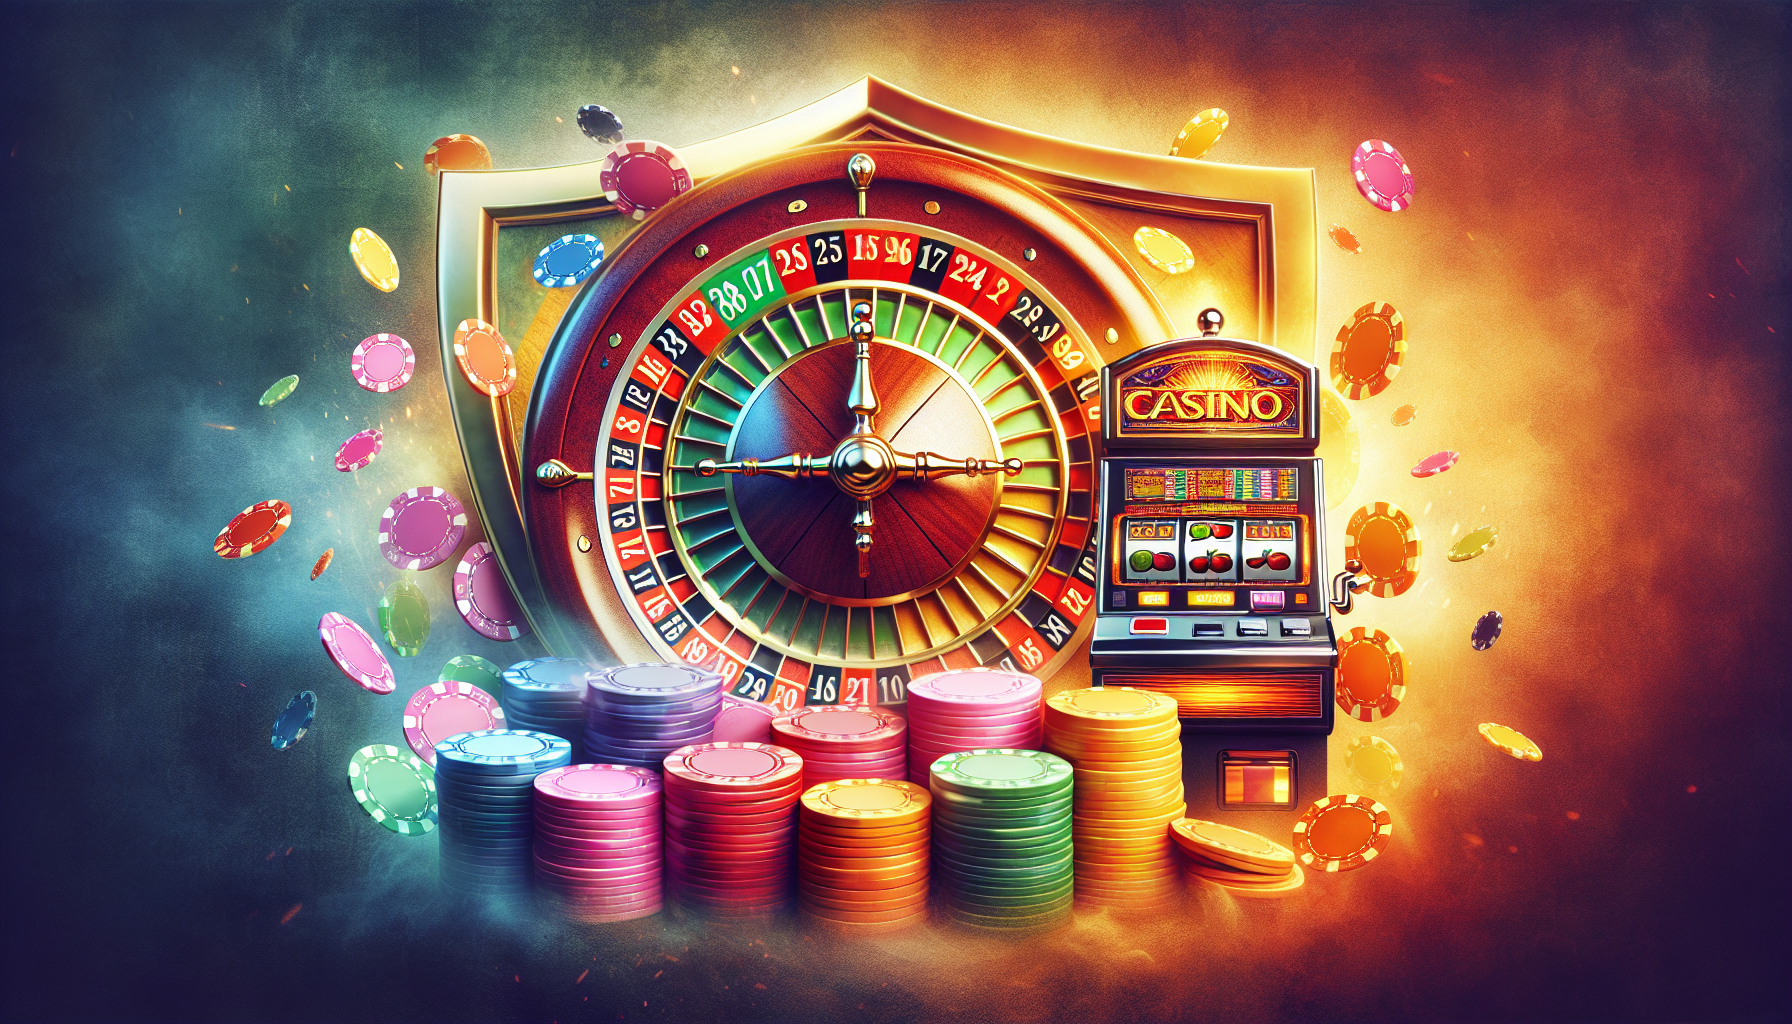 Essential Features of Top Real Money Casinos